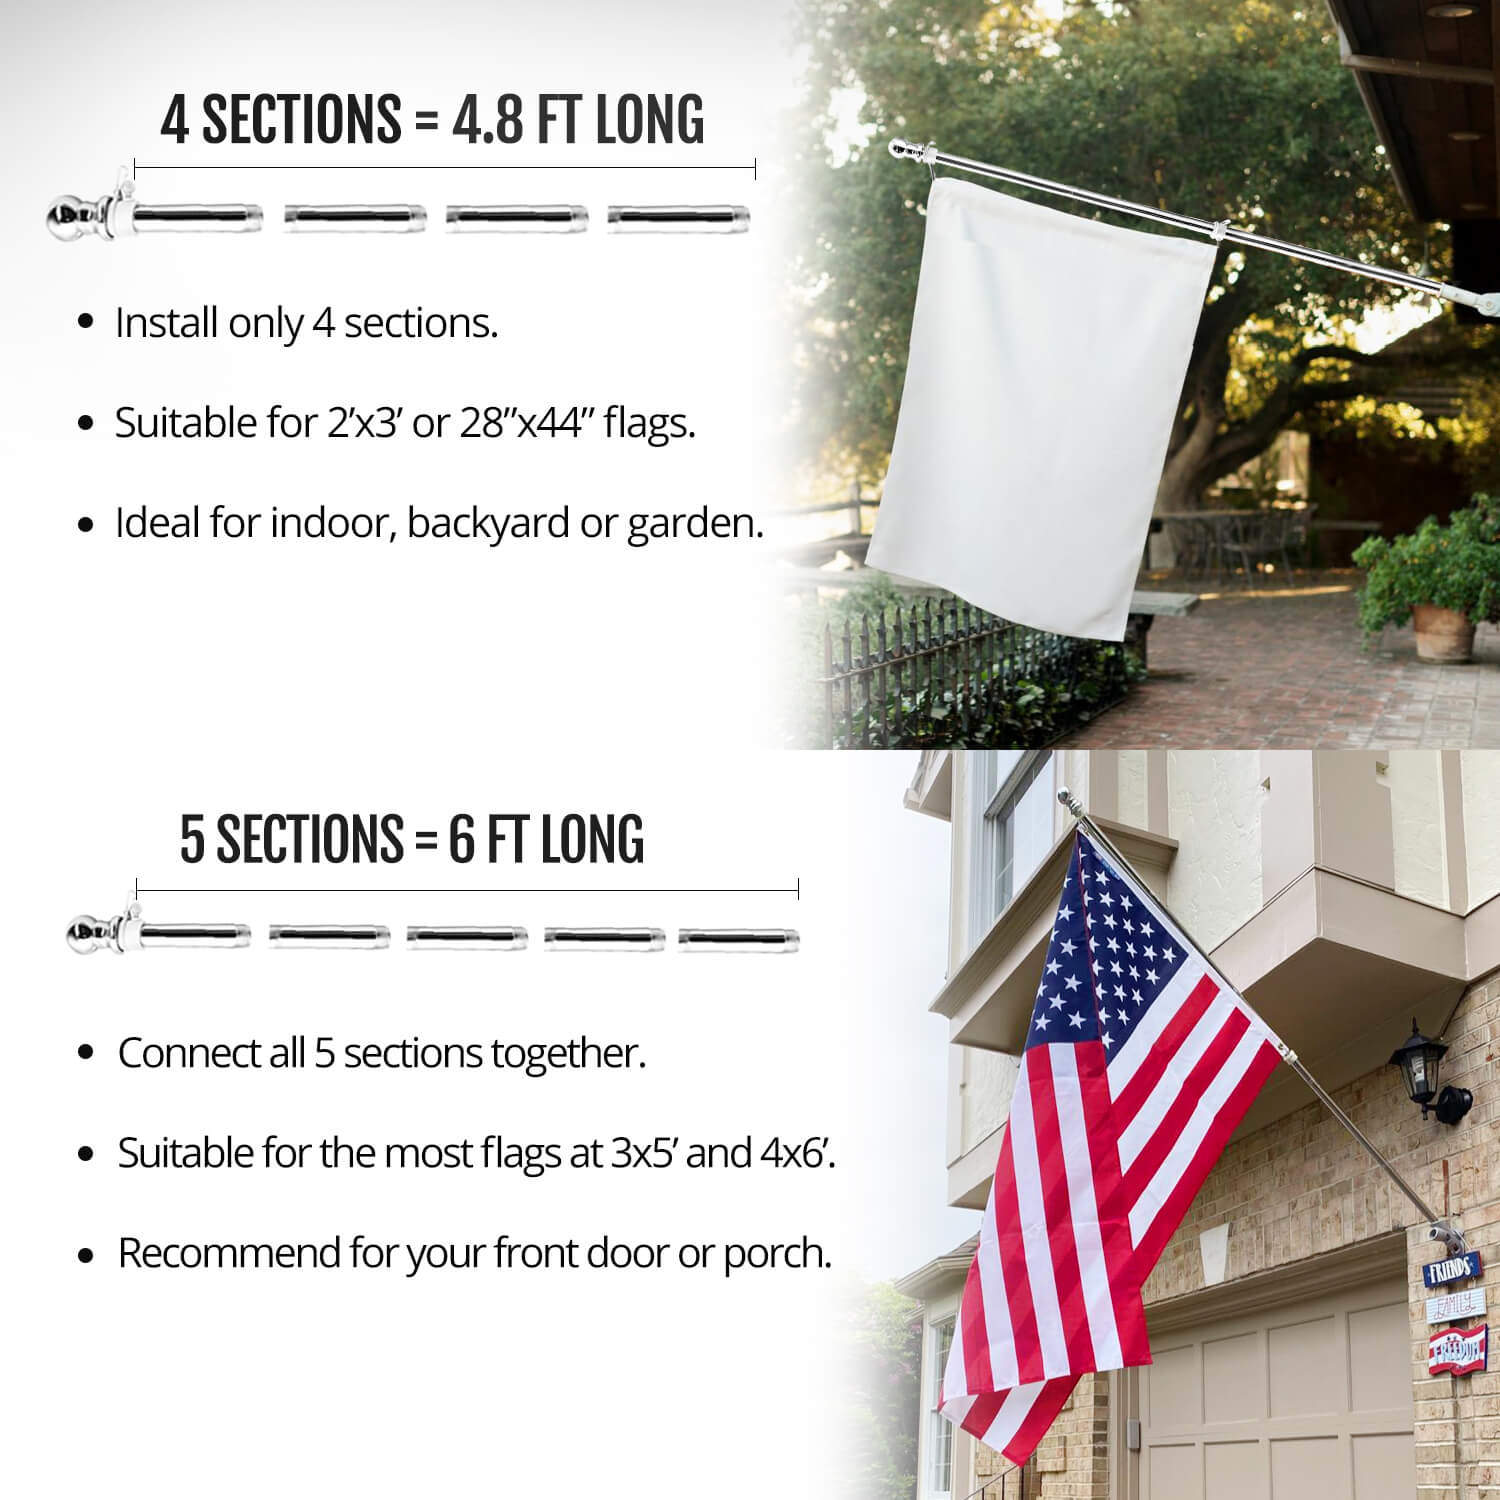 Pole with Silver Bracket 5 FT Stainless Steel Tangle Free Spinning FlagPole with Wall-Mount Bracket for House Garden Yard,Residential/Commercial Flag Pole HeroShow Flag Pole Kit 